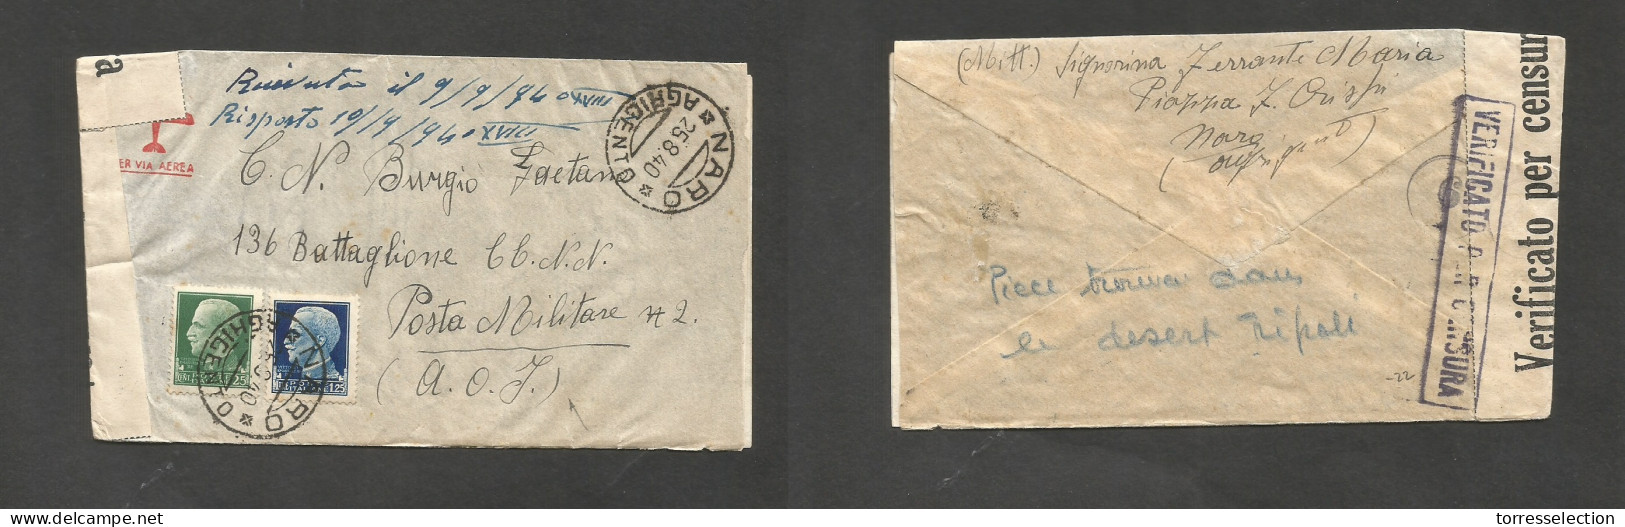 Italy - XX. 1940 (25 Aug) Naro - Africa Oriental Italiana. Air Multifkd Censored Envelope, Censored With Contains. SALE. - Ohne Zuordnung